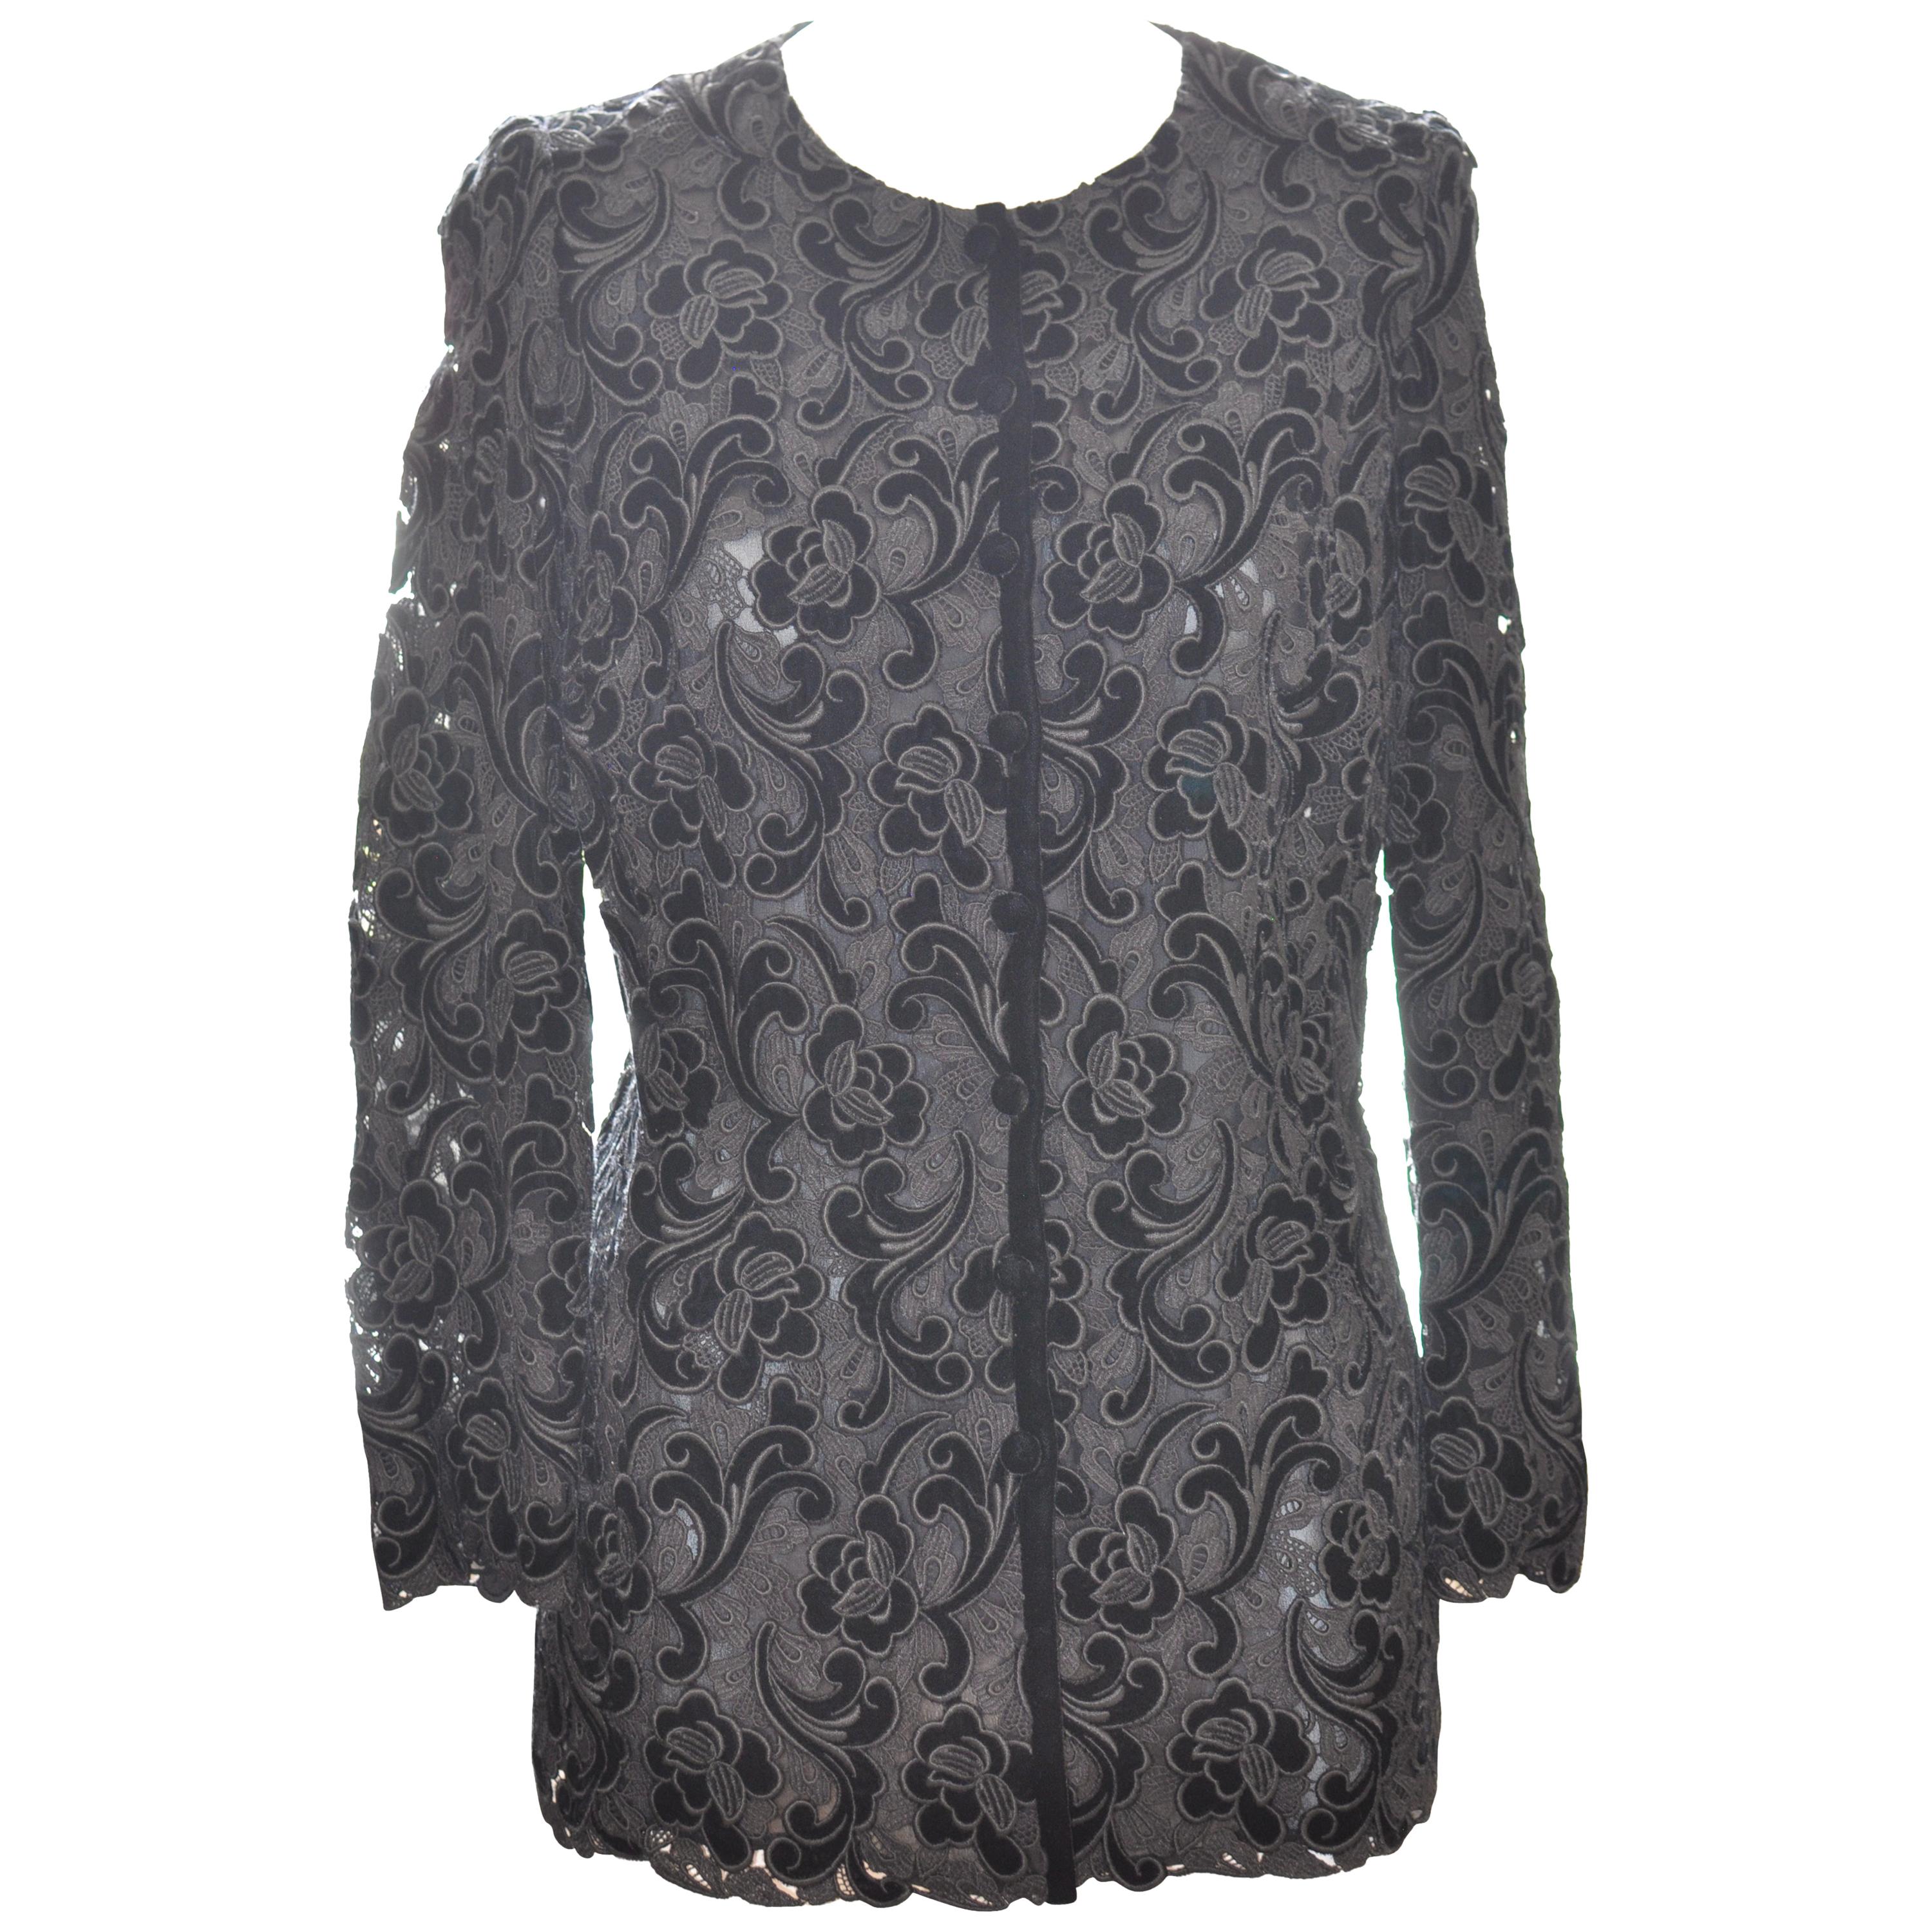 A.K.R.I.S Velvet and Lace Cut-Out Evening Jacket Size 12 US